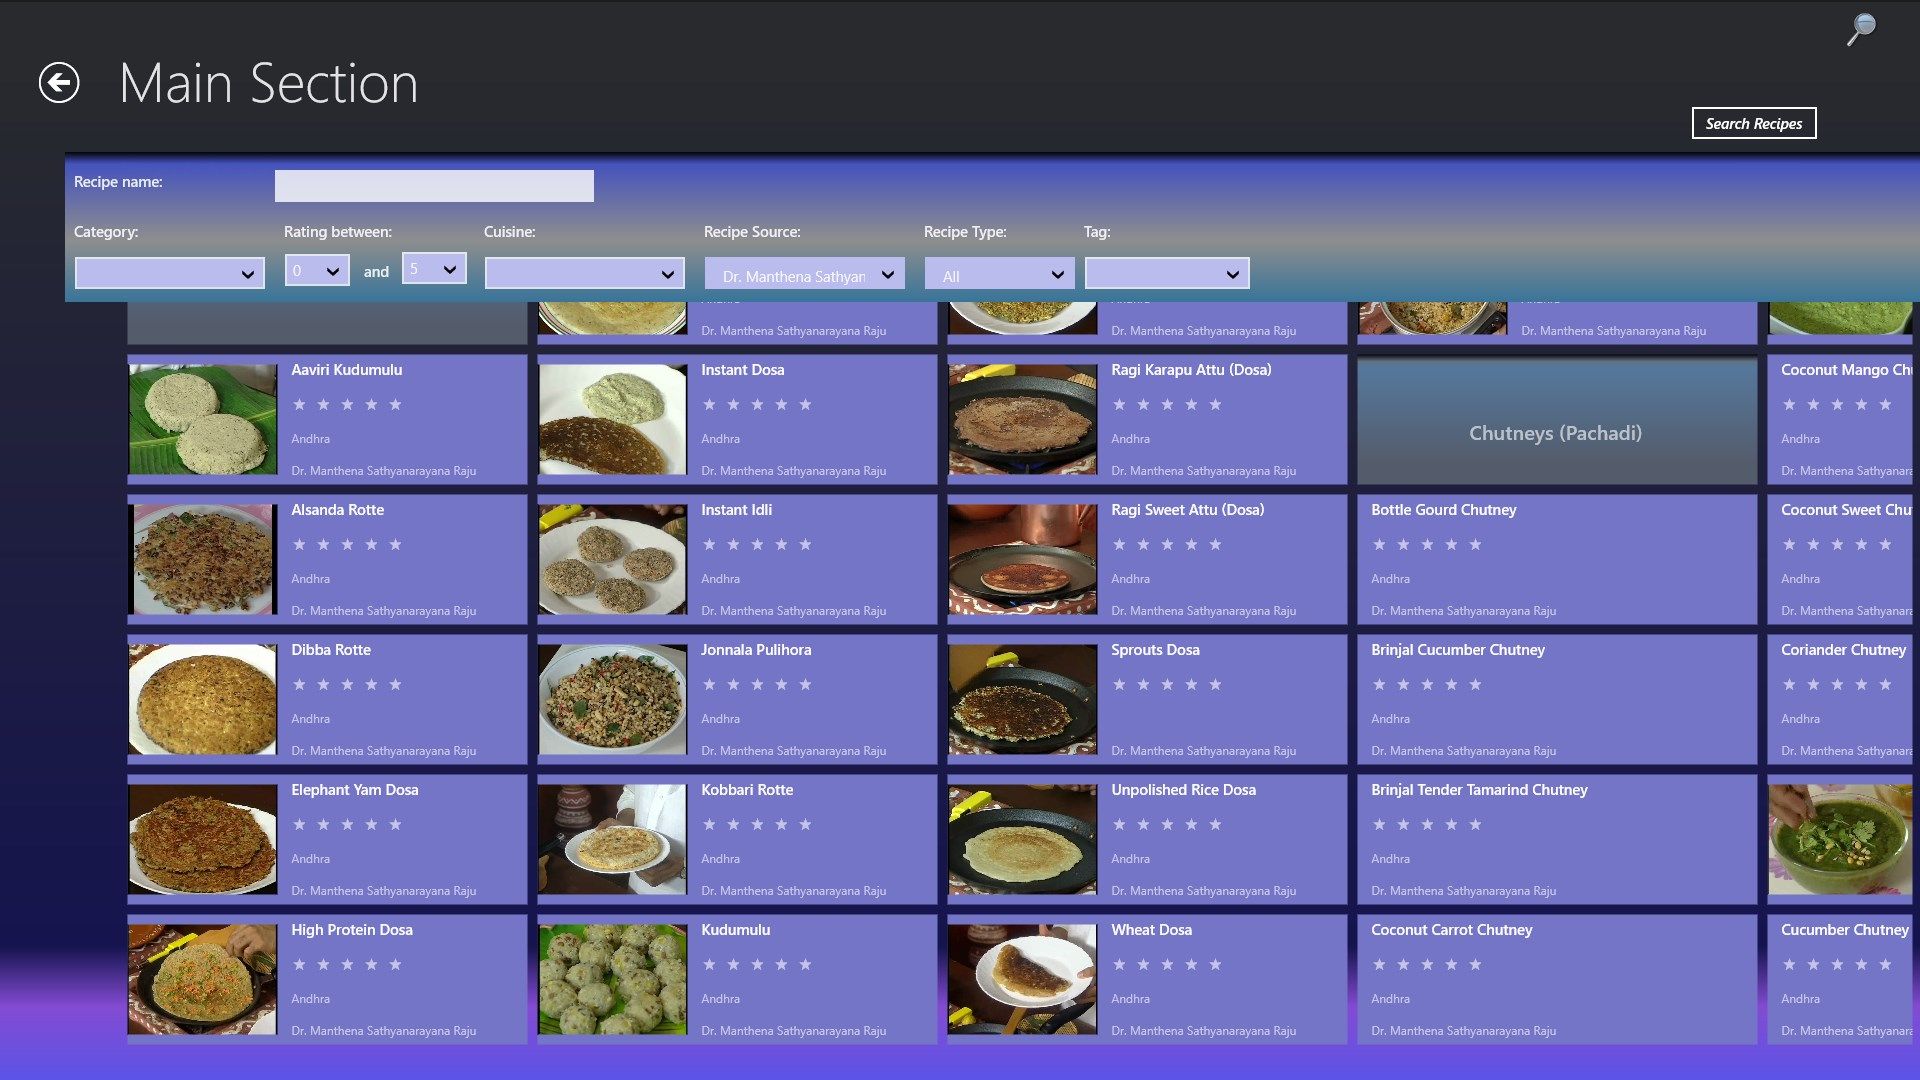 Your complete recipe collection is listed under Main Section. The Advanced search allows you to access any recipe instantly. Virtual Books open up on the same screen with controls limited to the book.